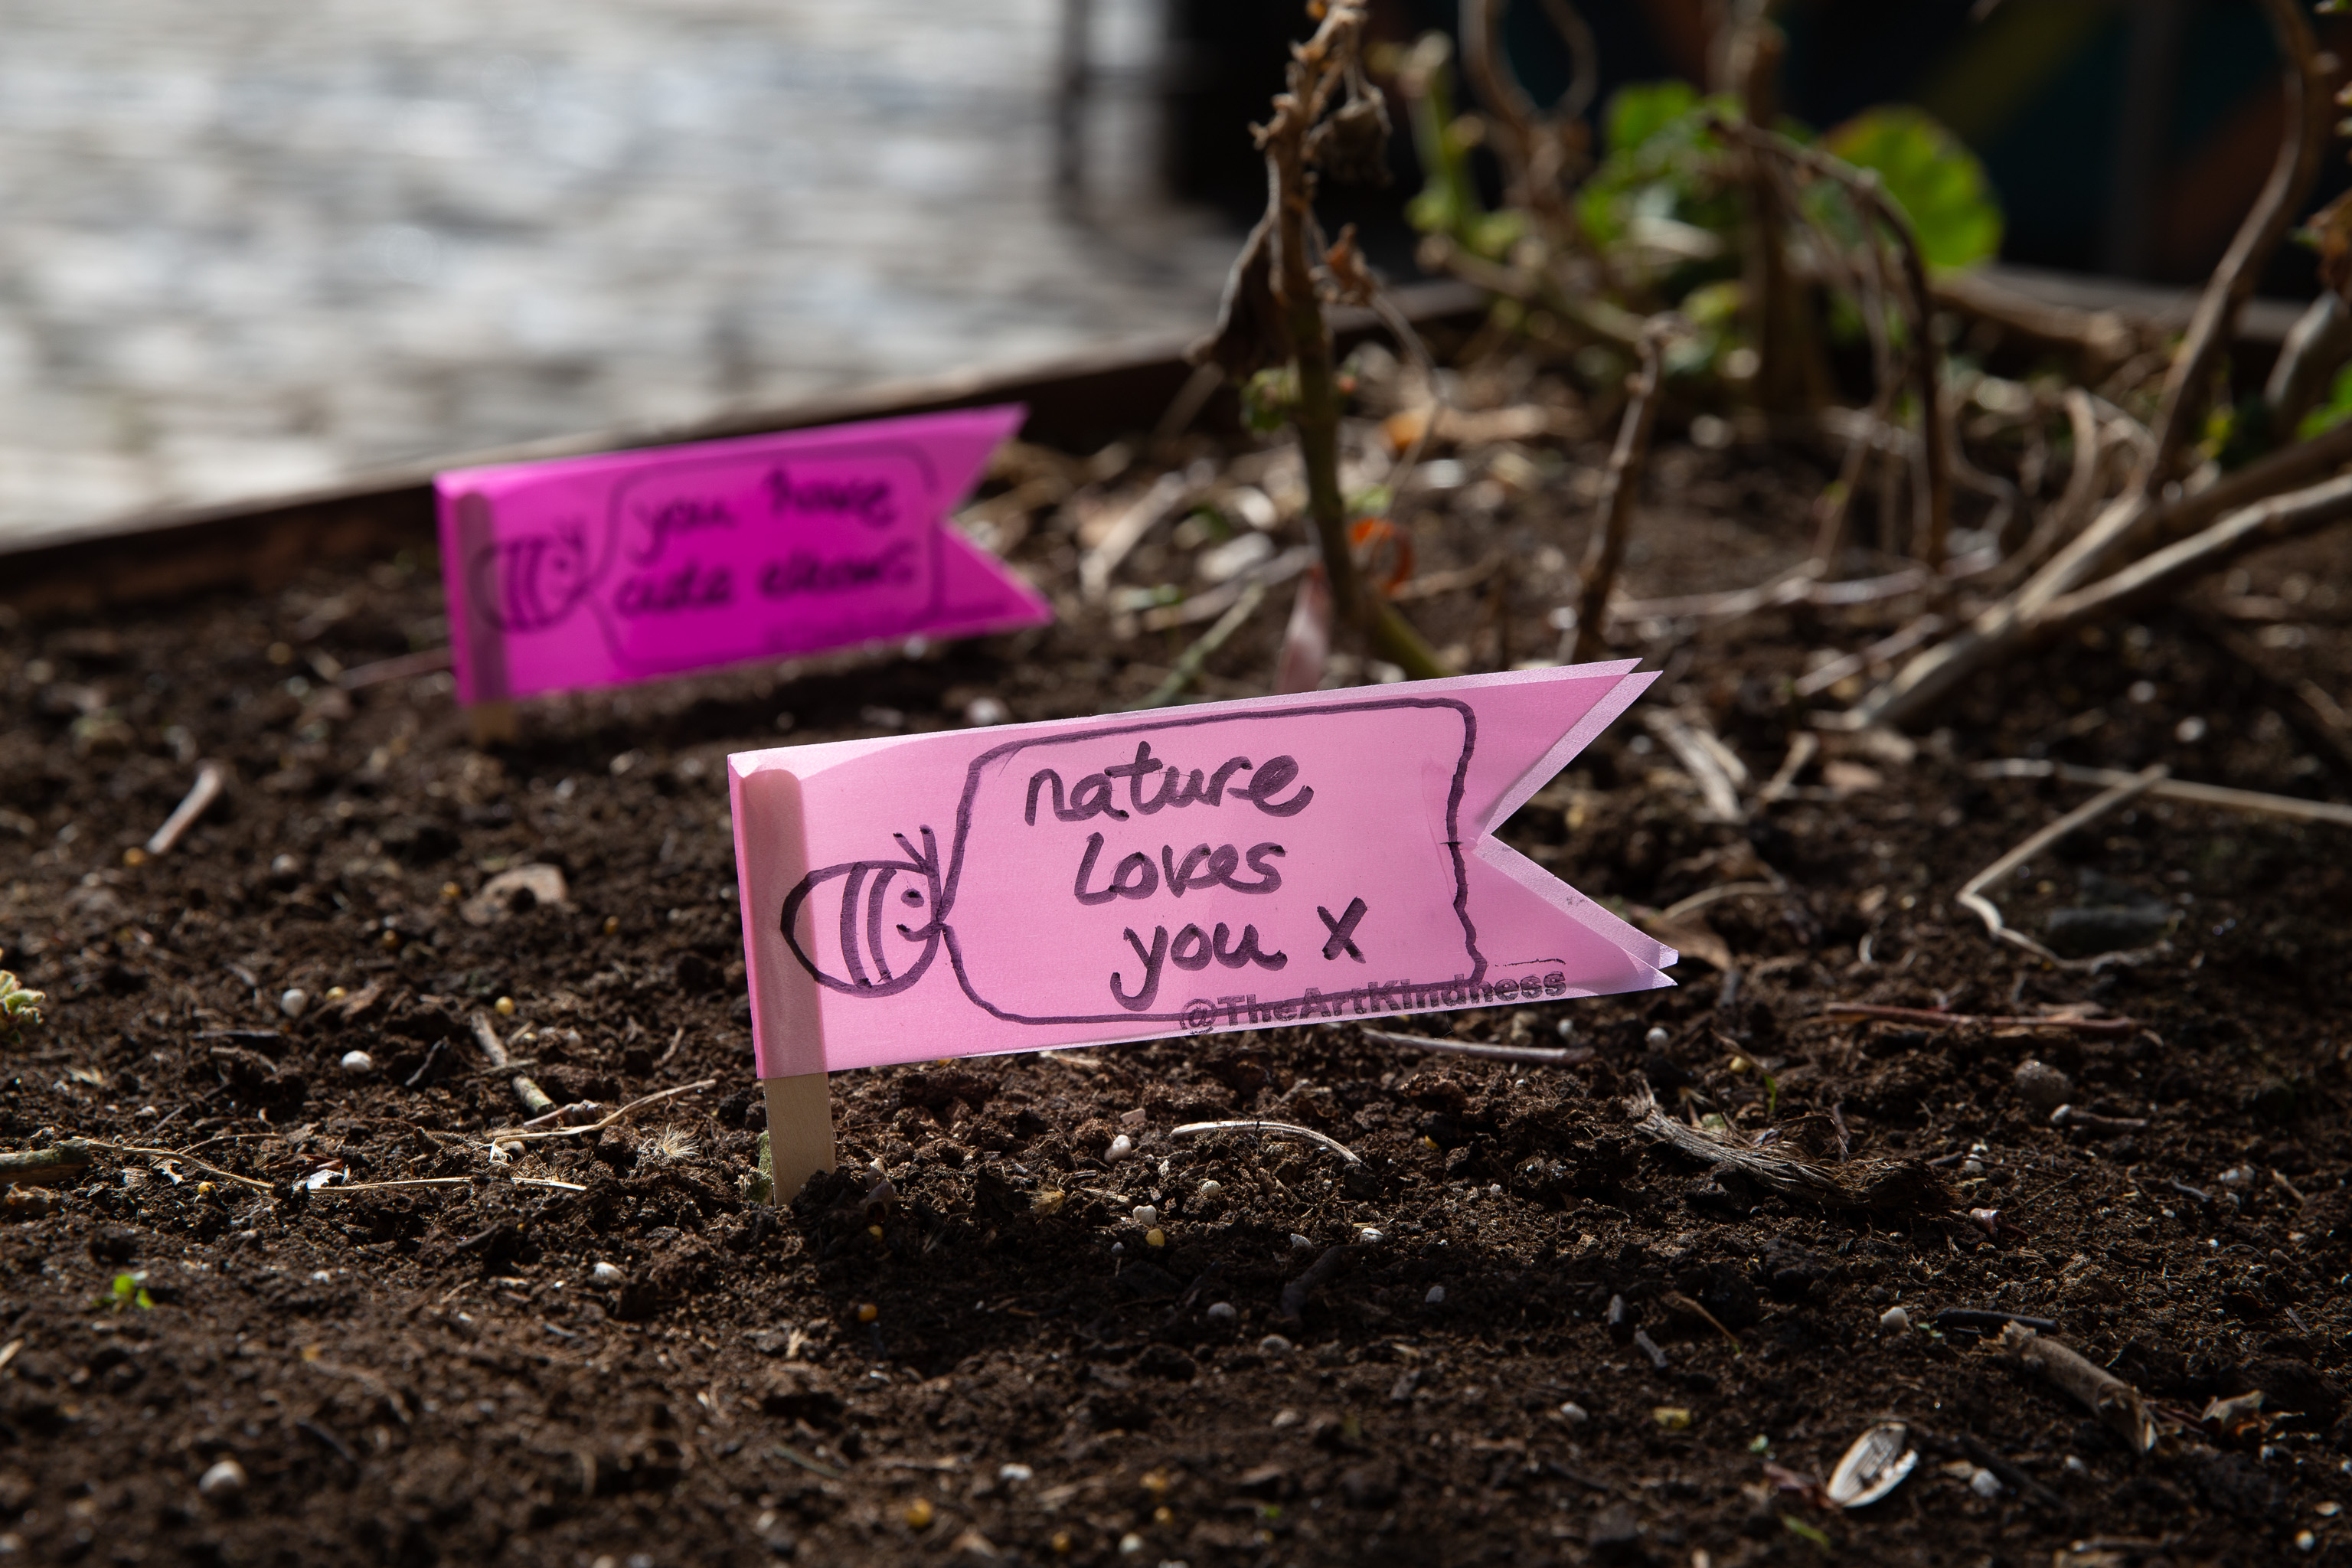 Nature Loves You
The Art of Kindness project.
